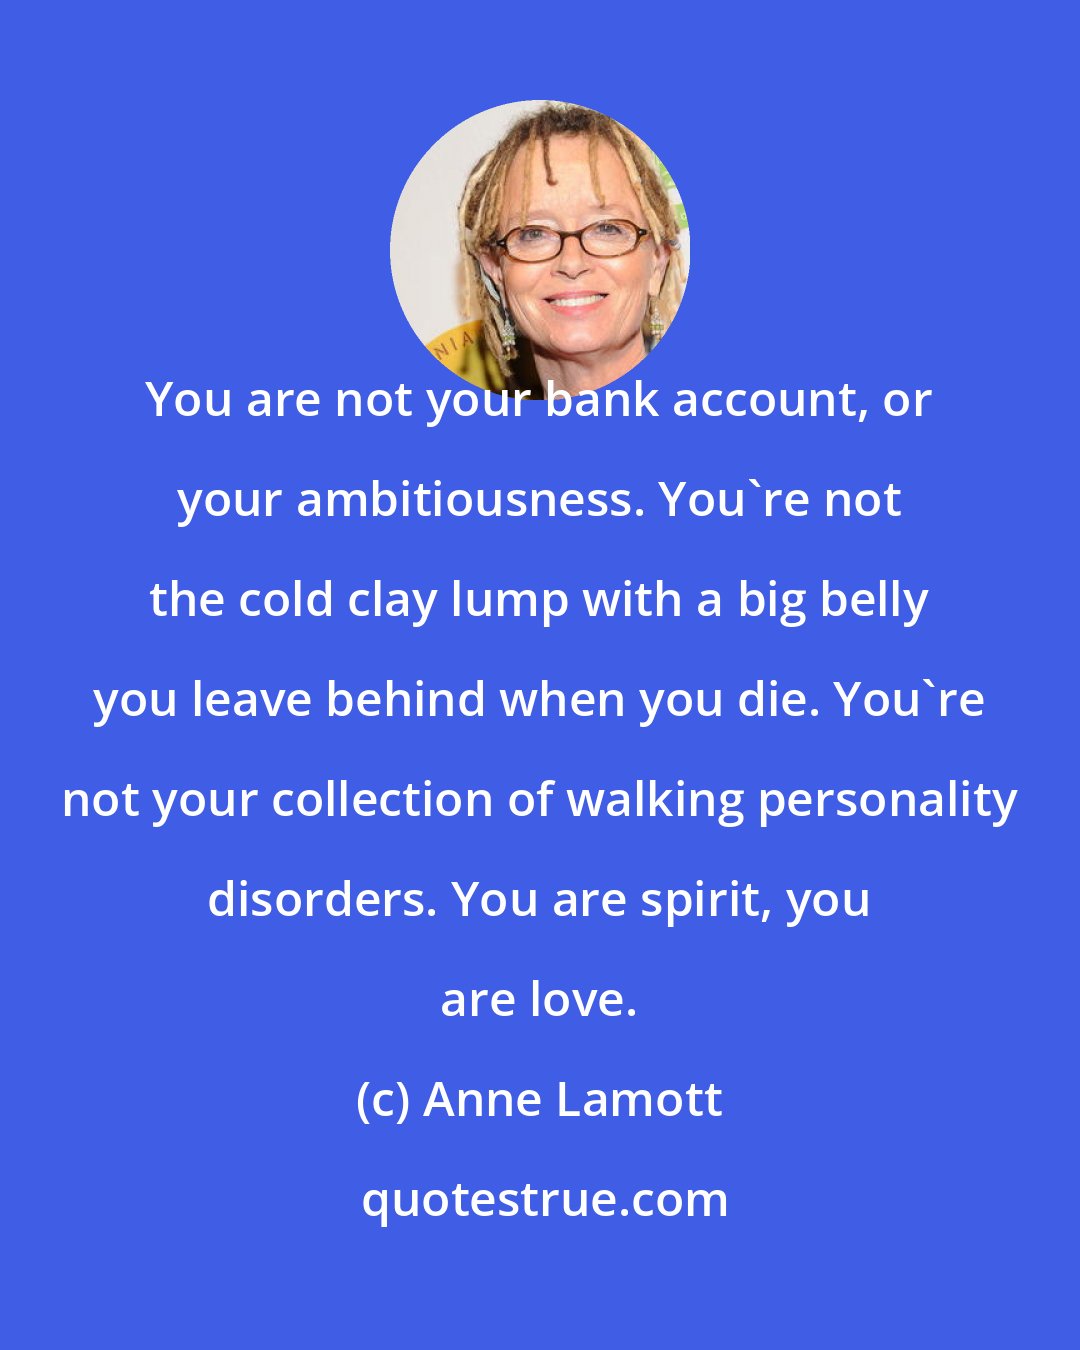 Anne Lamott: You are not your bank account, or your ambitiousness. You're not the cold clay lump with a big belly you leave behind when you die. You're not your collection of walking personality disorders. You are spirit, you are love.